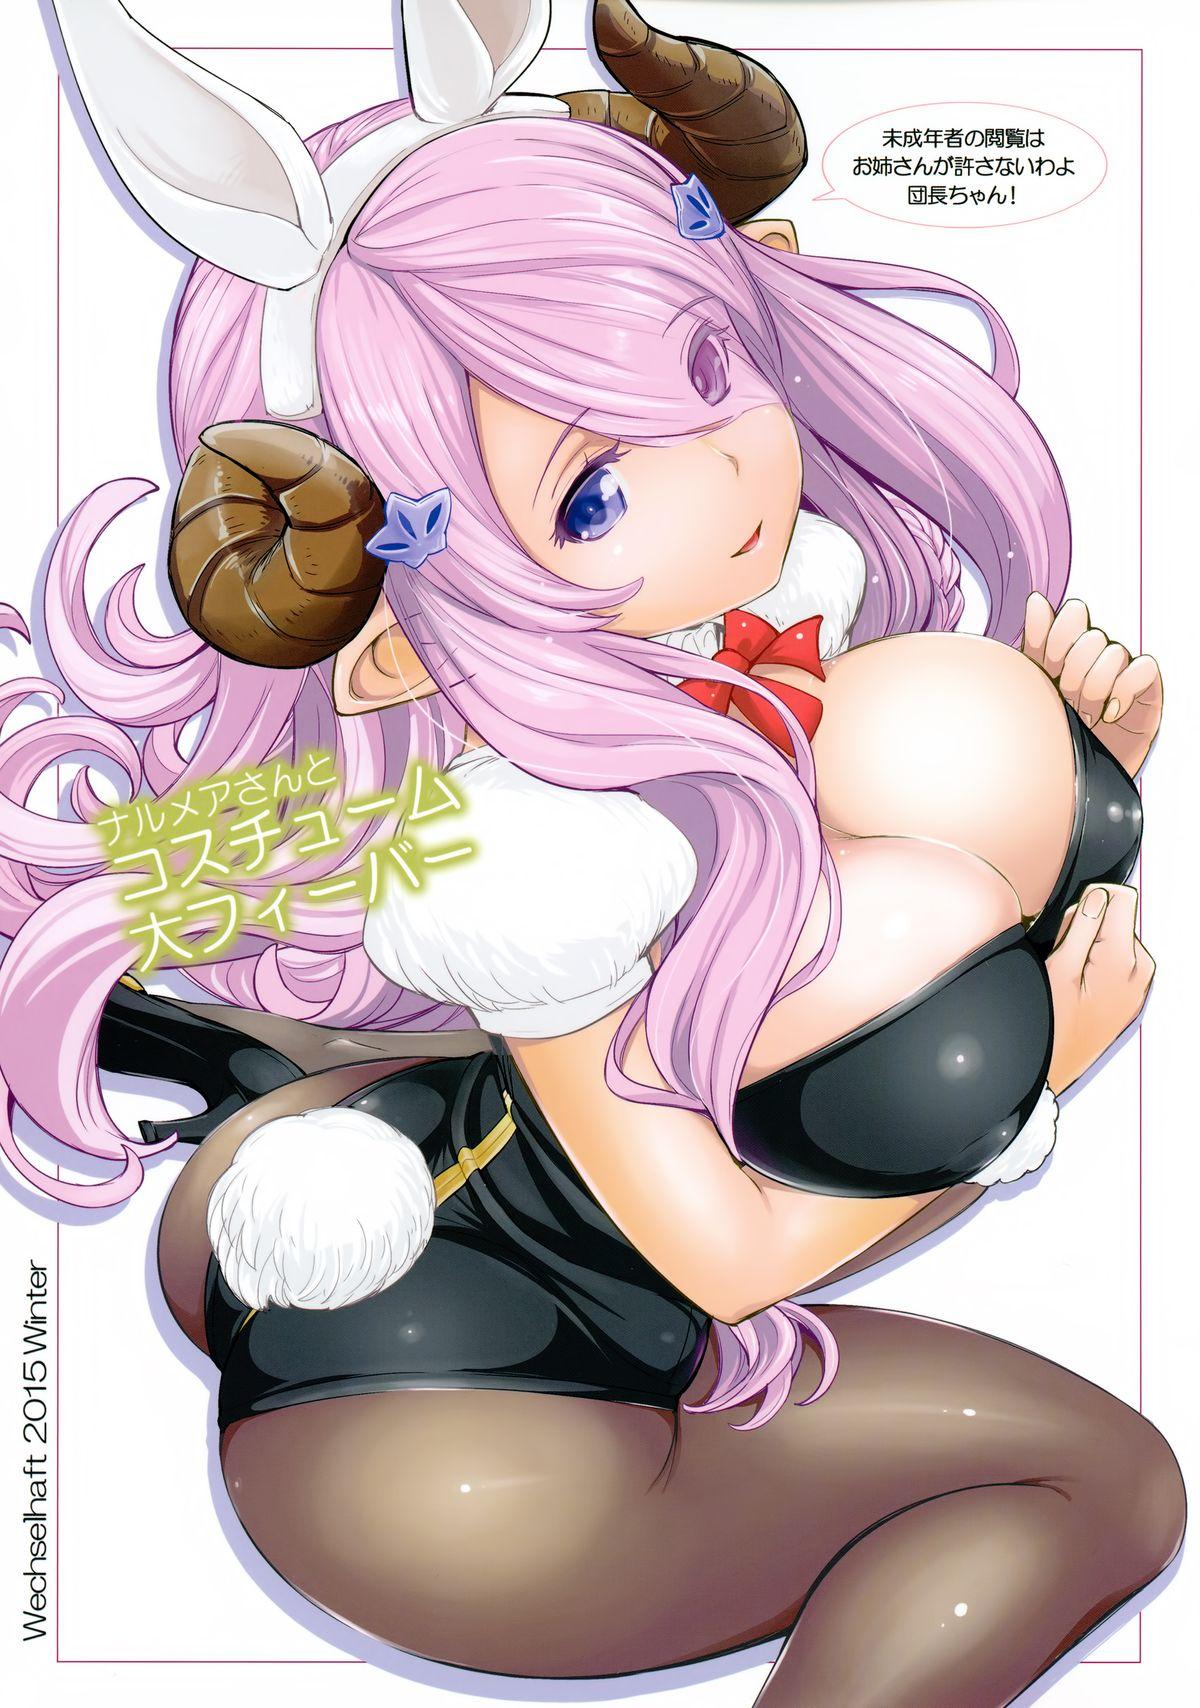  Narumeia-san to Costume Dai Fever - Granblue fantasy Young Tits - Picture 1